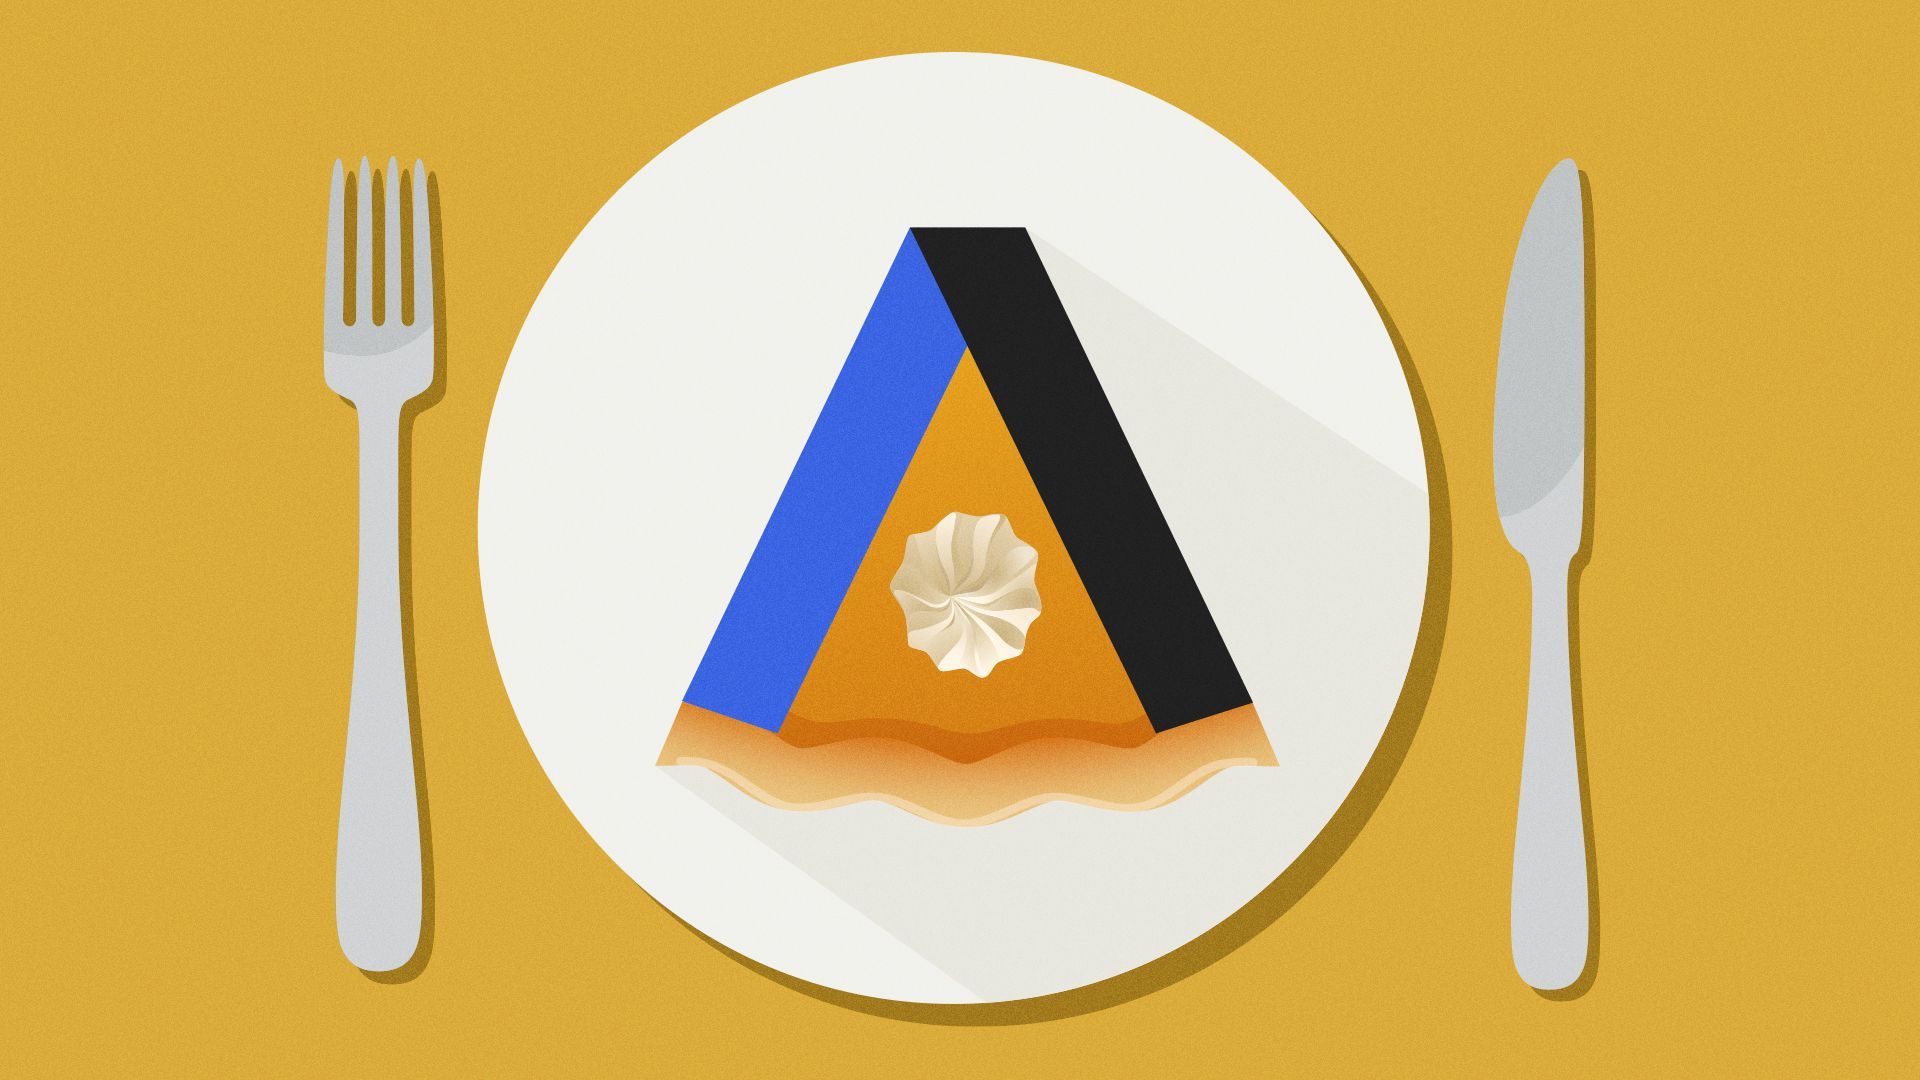 Illustration of a slice of pumpkin pie with the Axios logo.